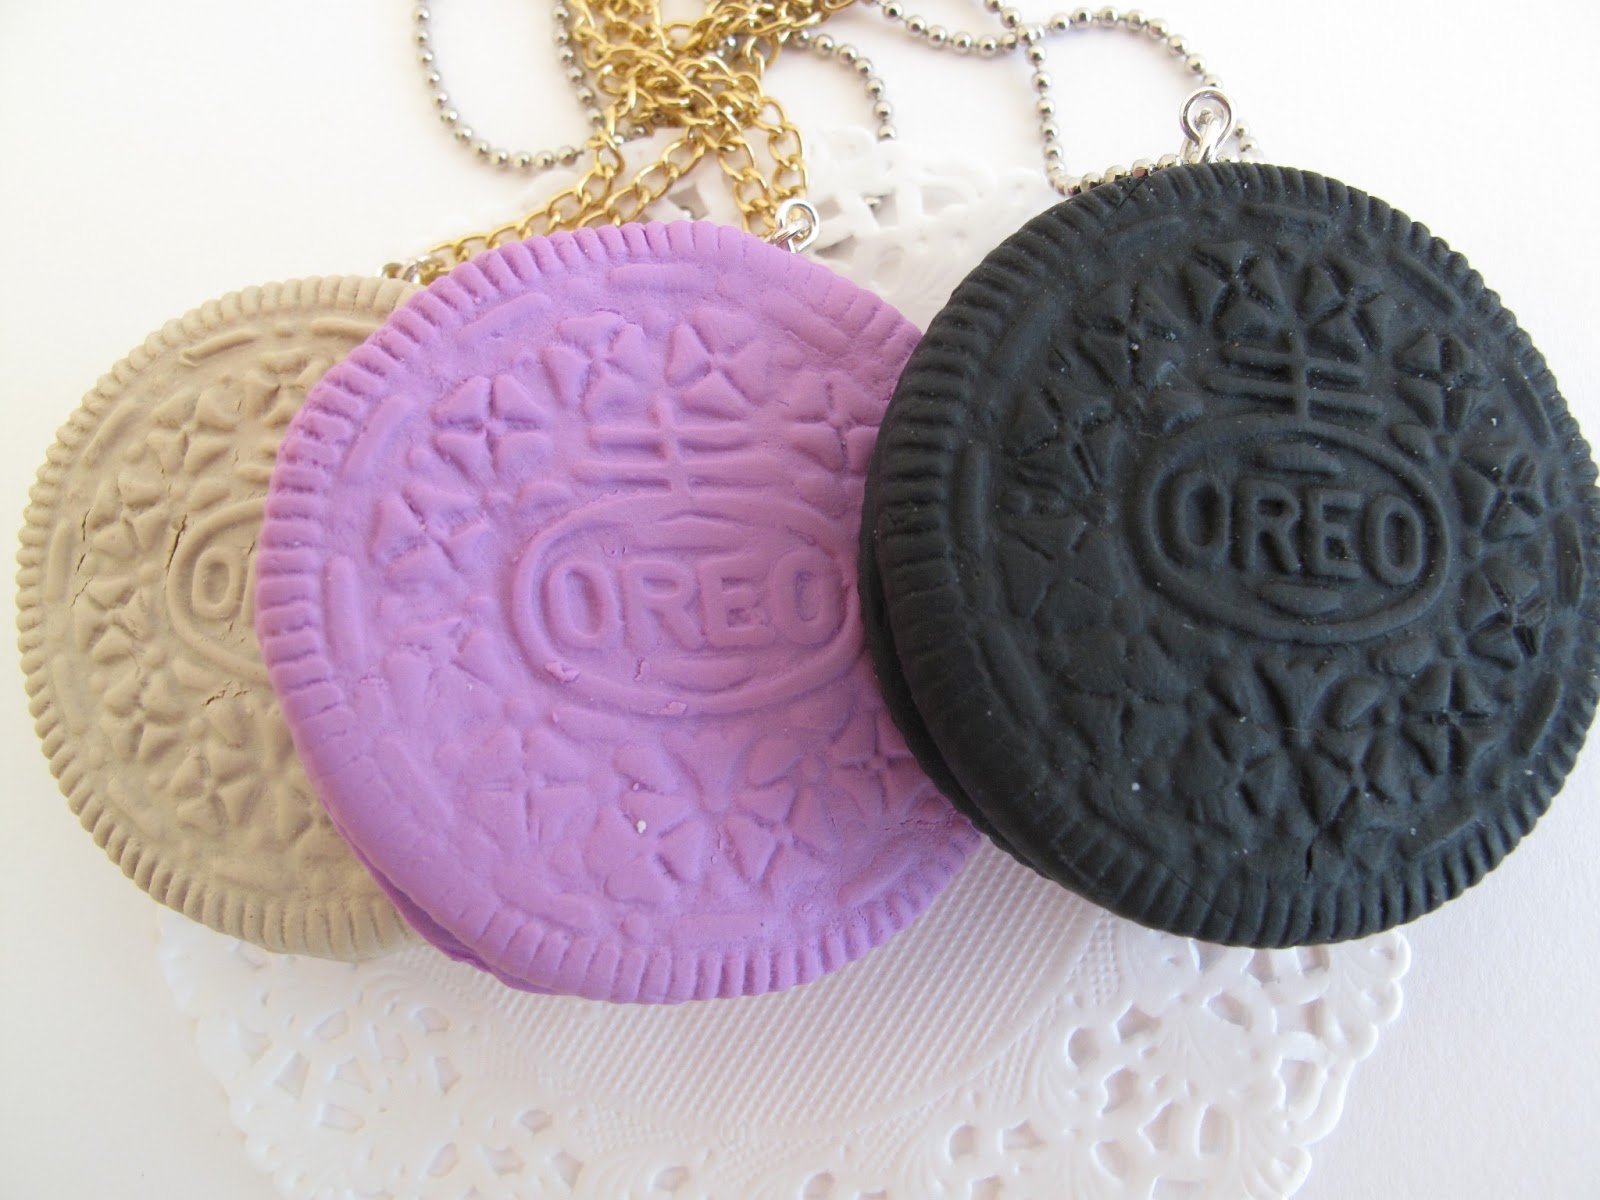 the crafter the merrier: Oreo cookie mold !!